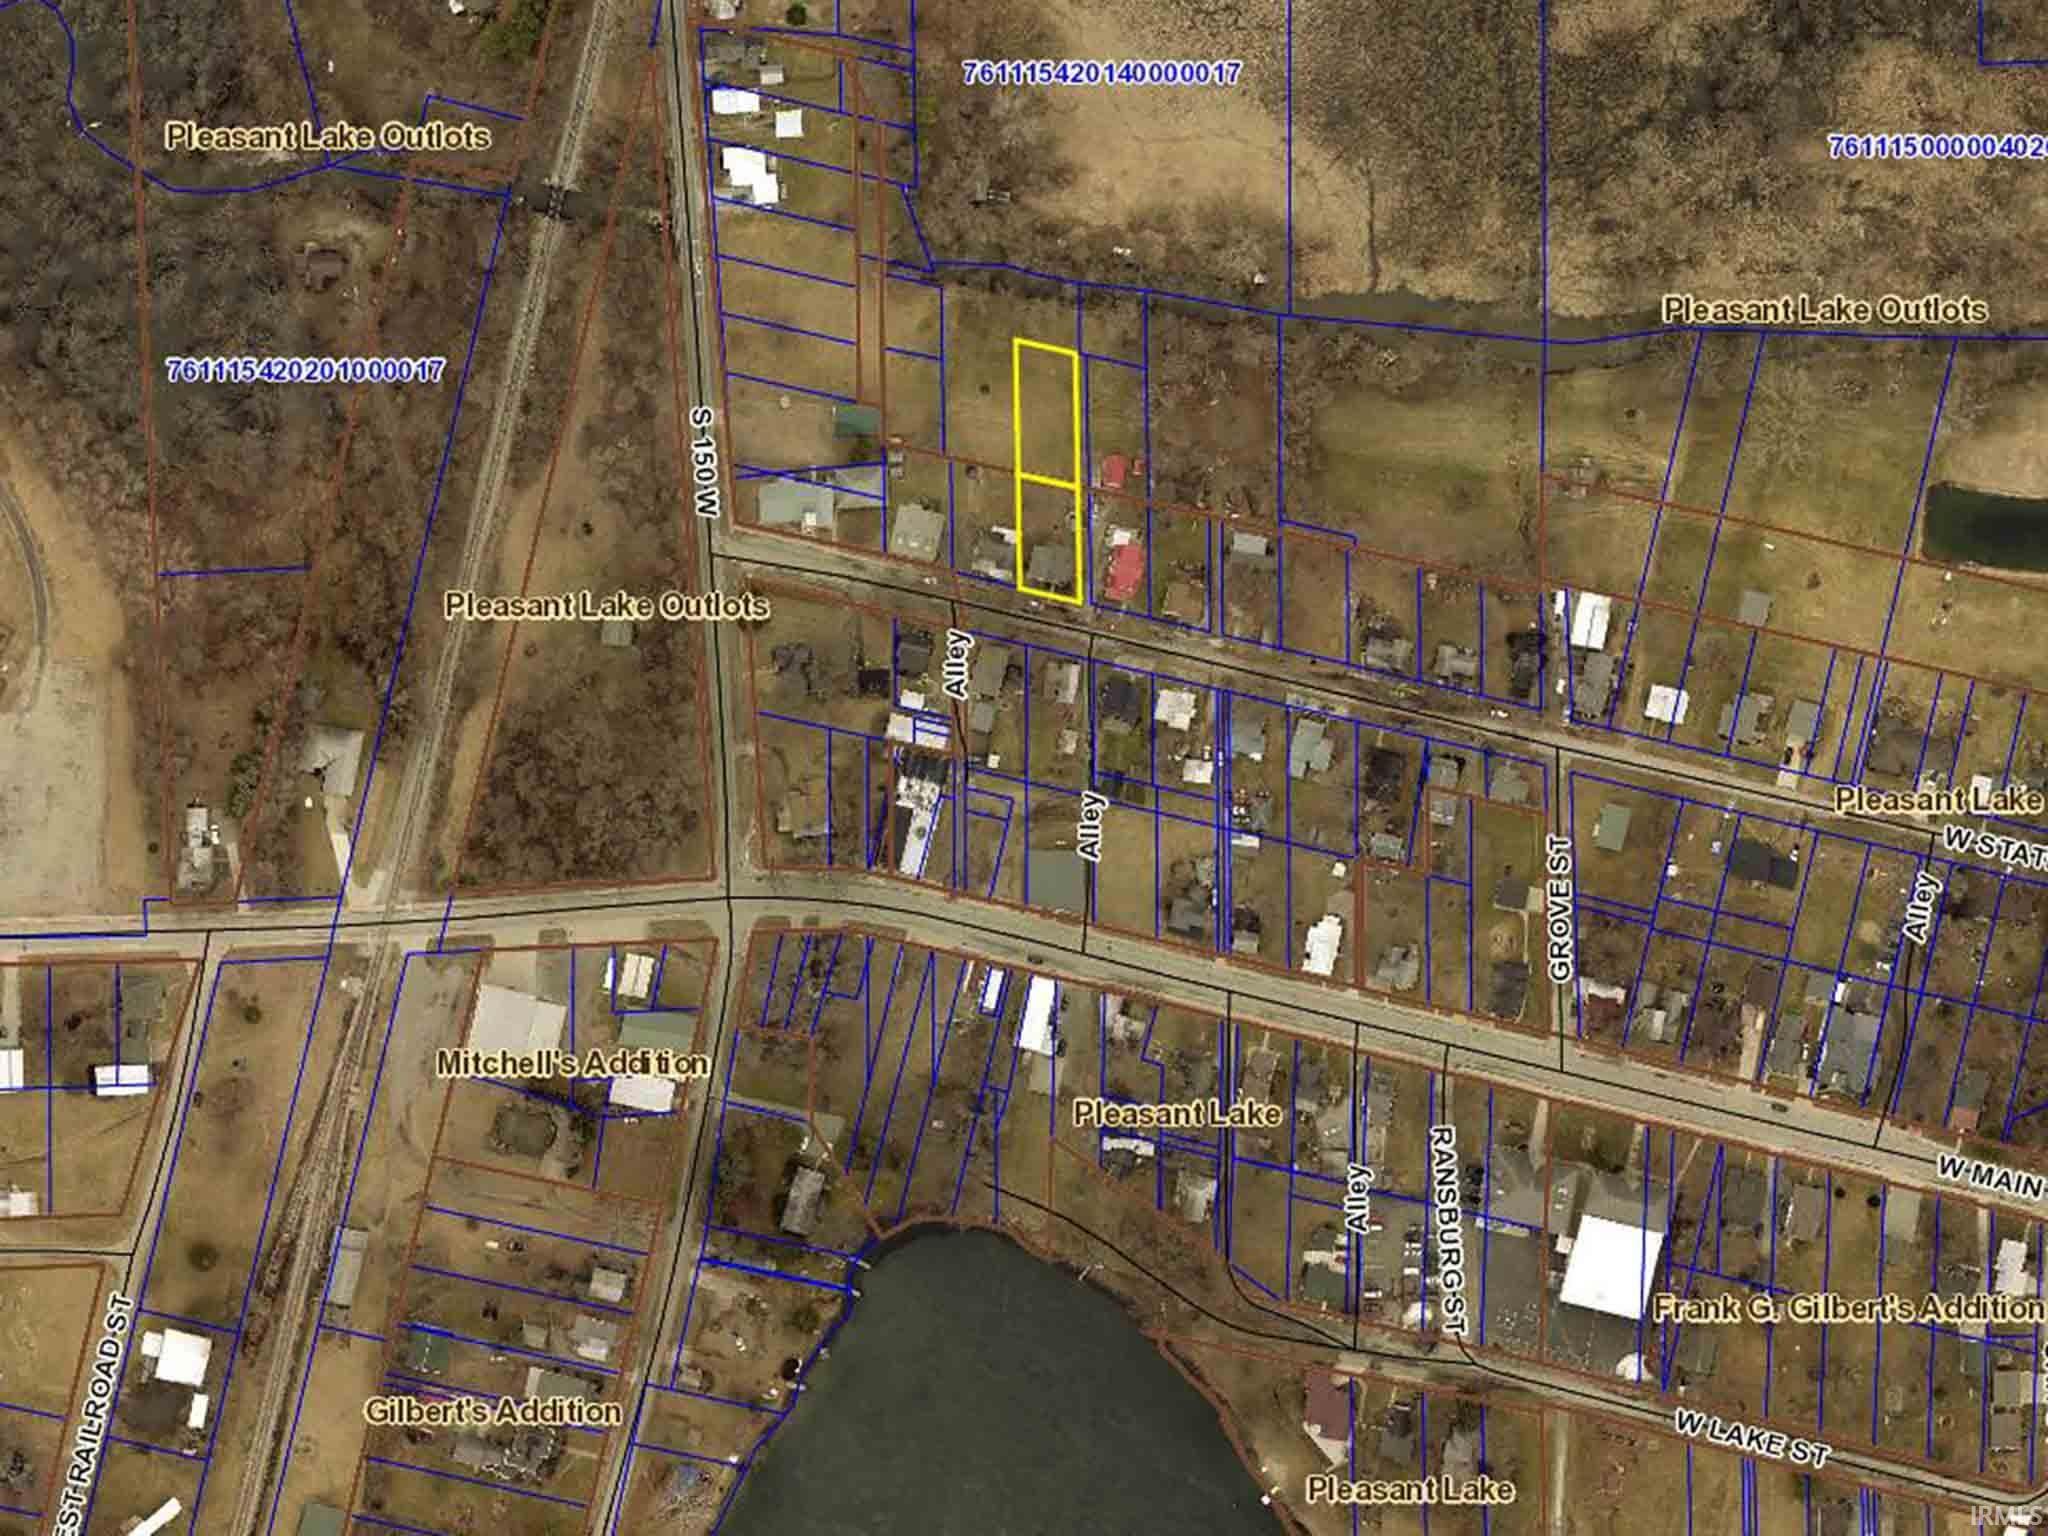 GIS view of property.